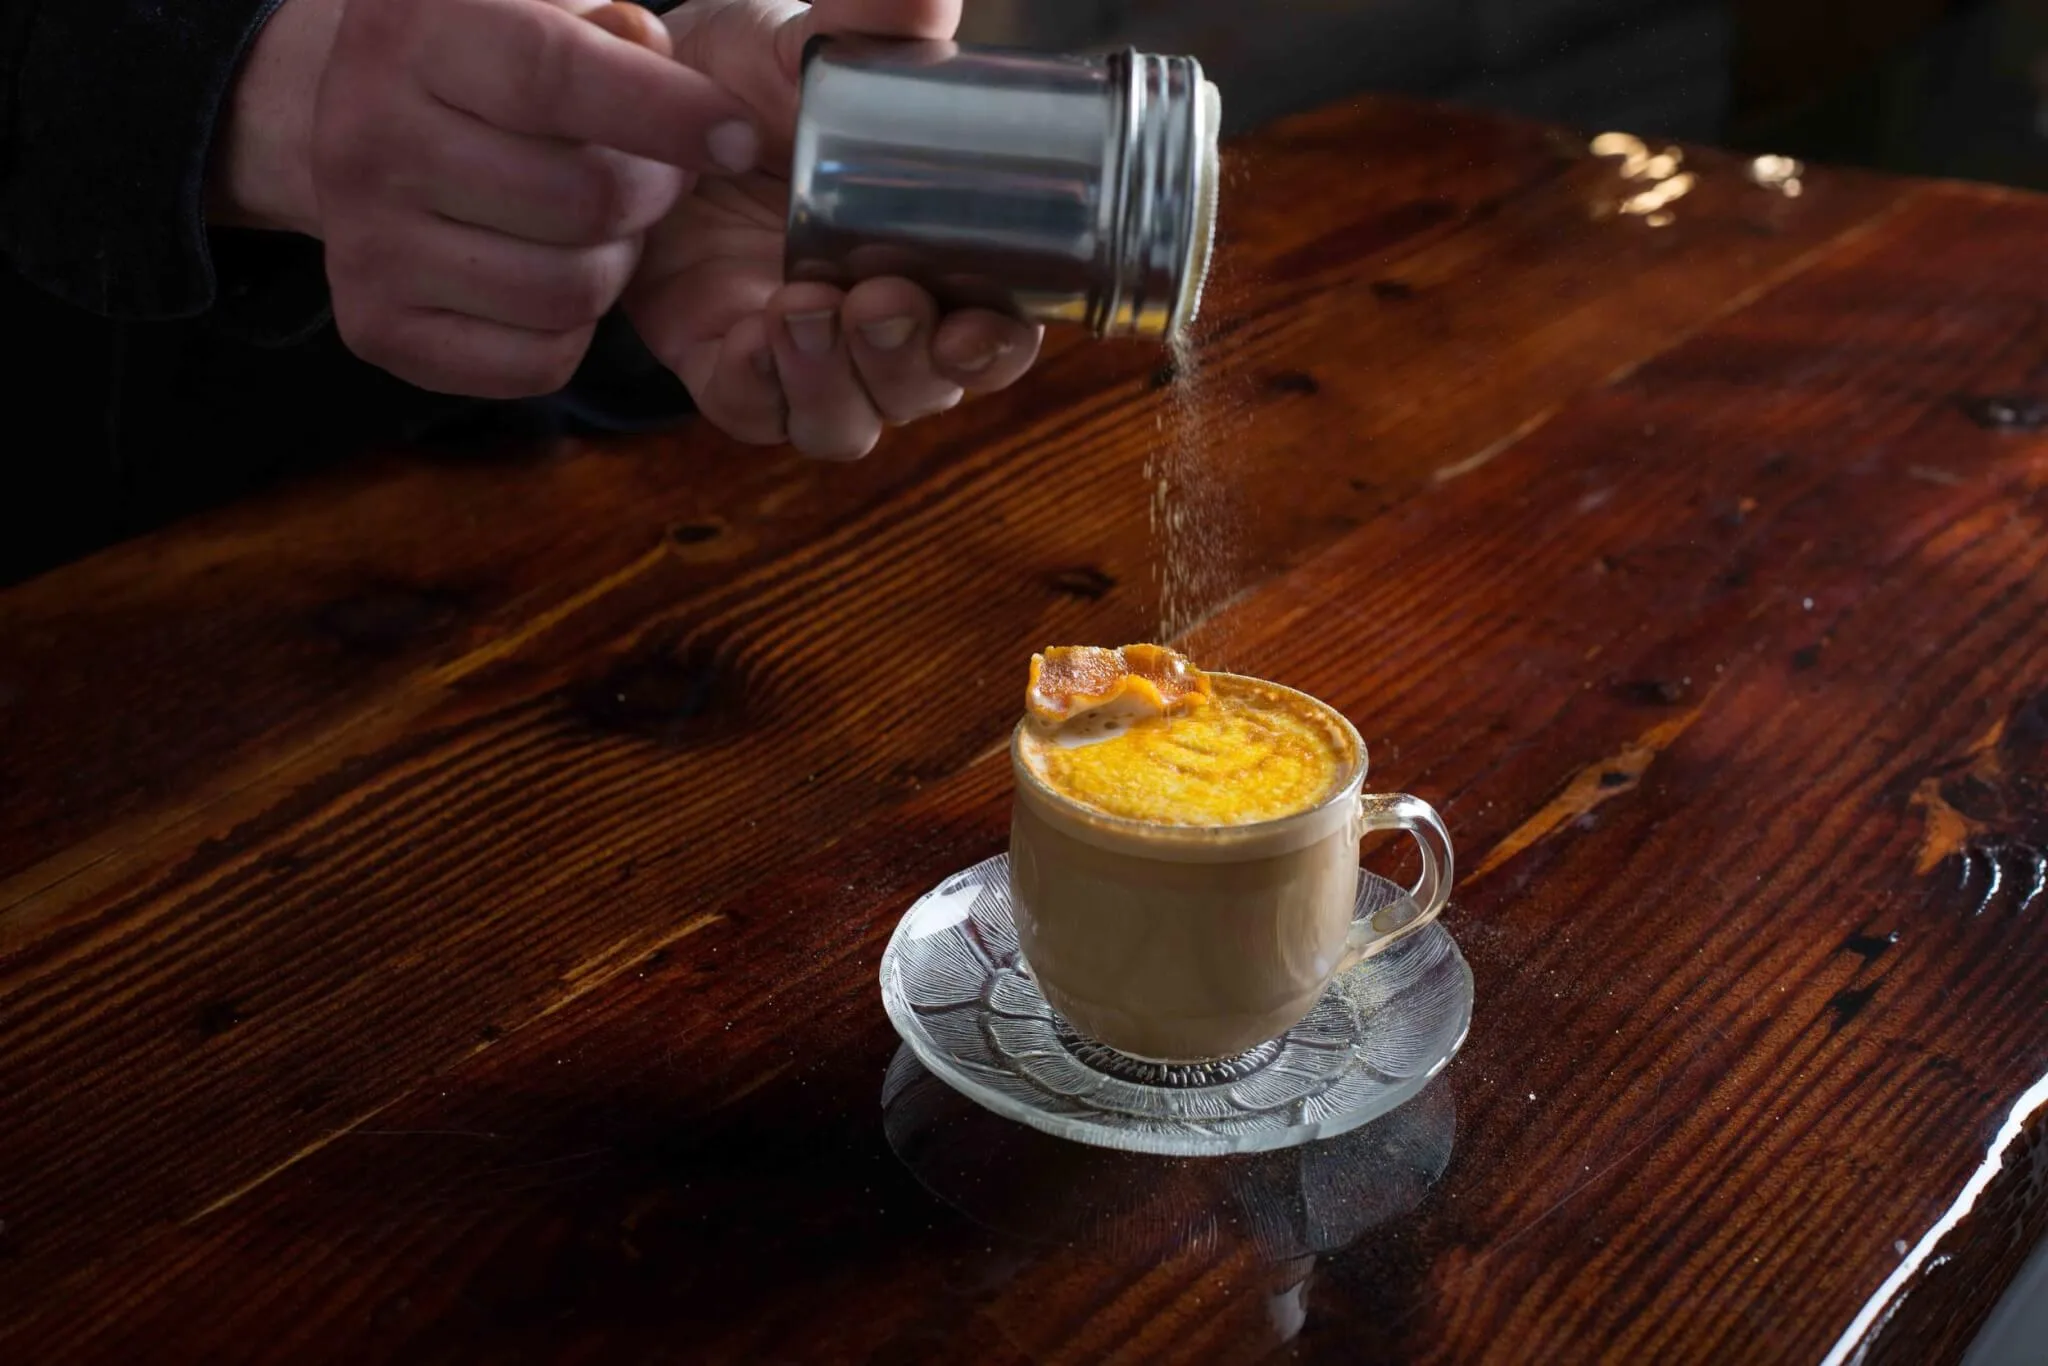 Discourse Coffee's Channel Orange drink, made with espresso, smoked and oaked vanilla, candied orange powder, and more.